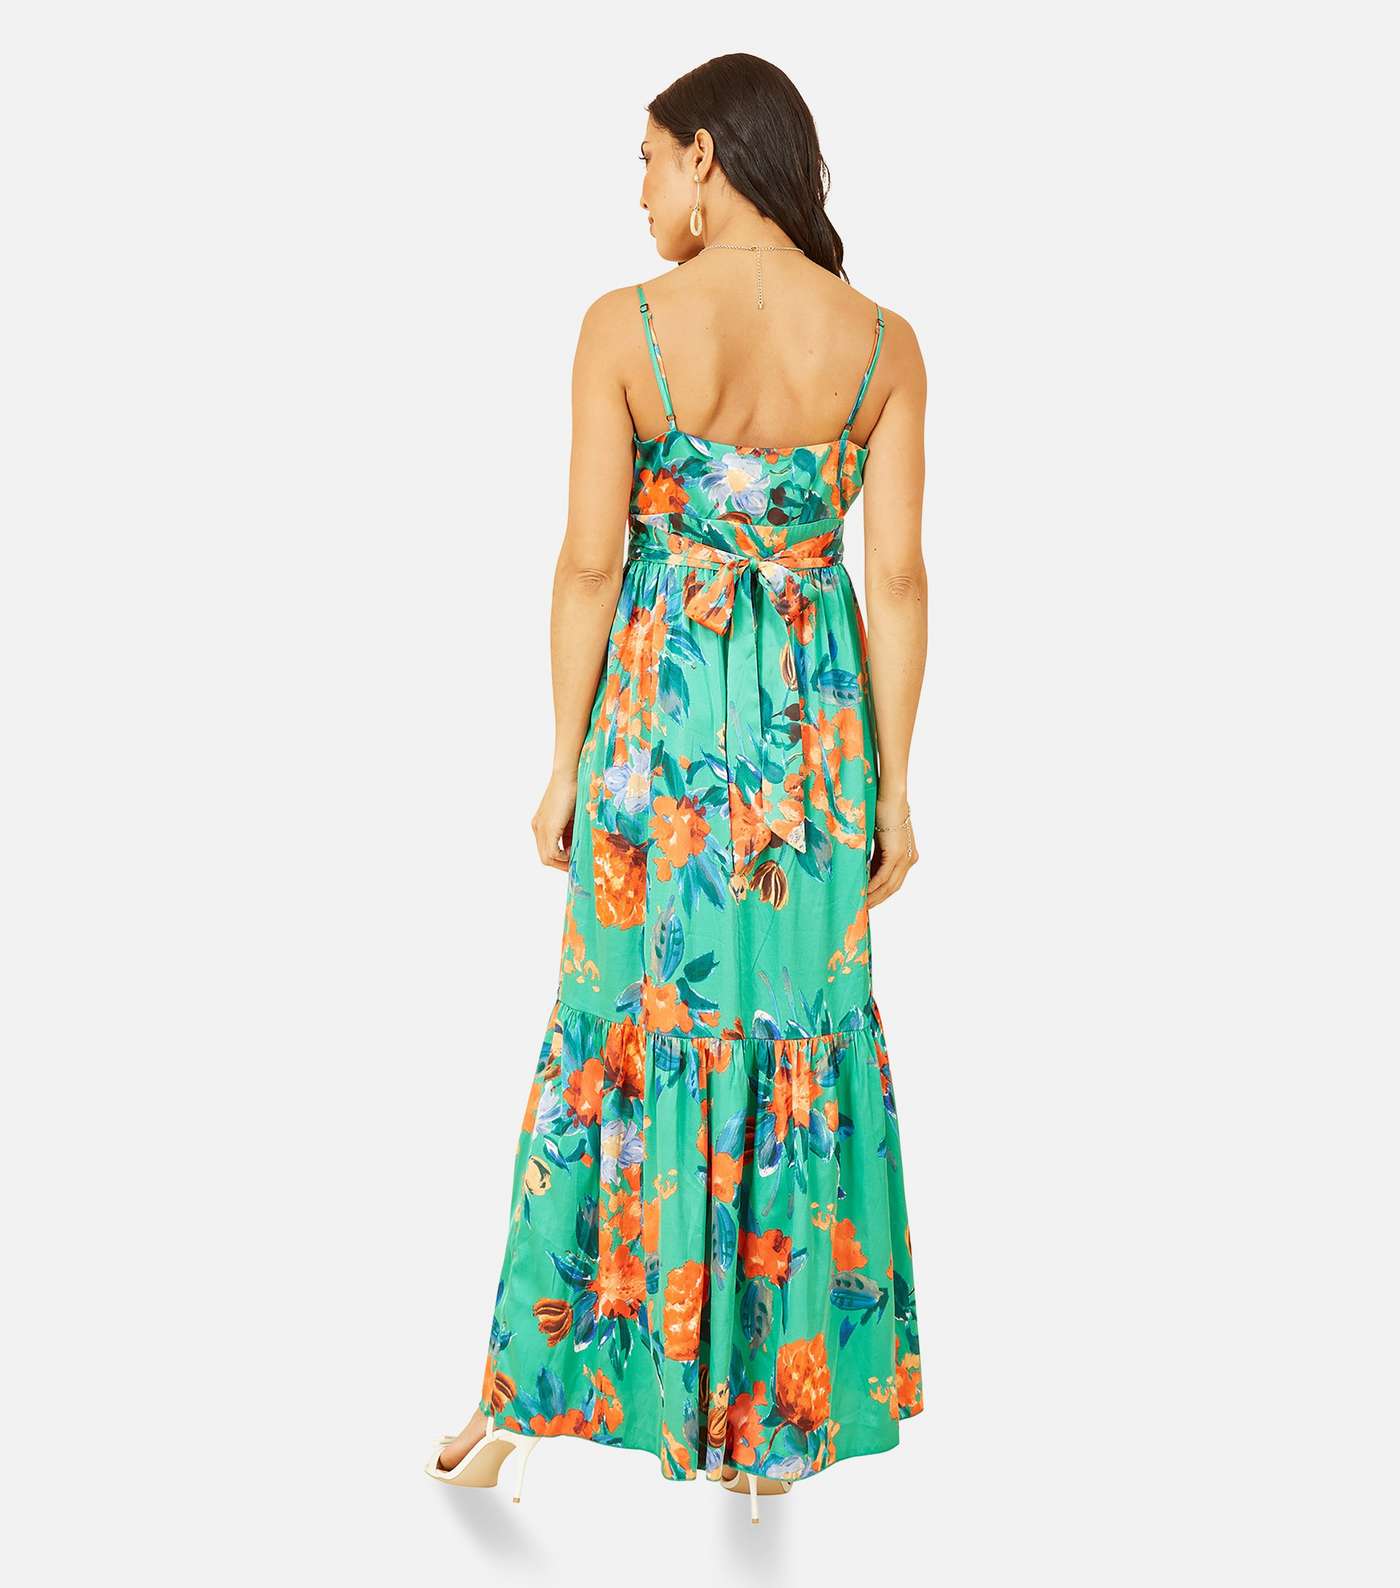 Yumi Green Floral Satin Tiered Strappy Maxi Dress Image 4